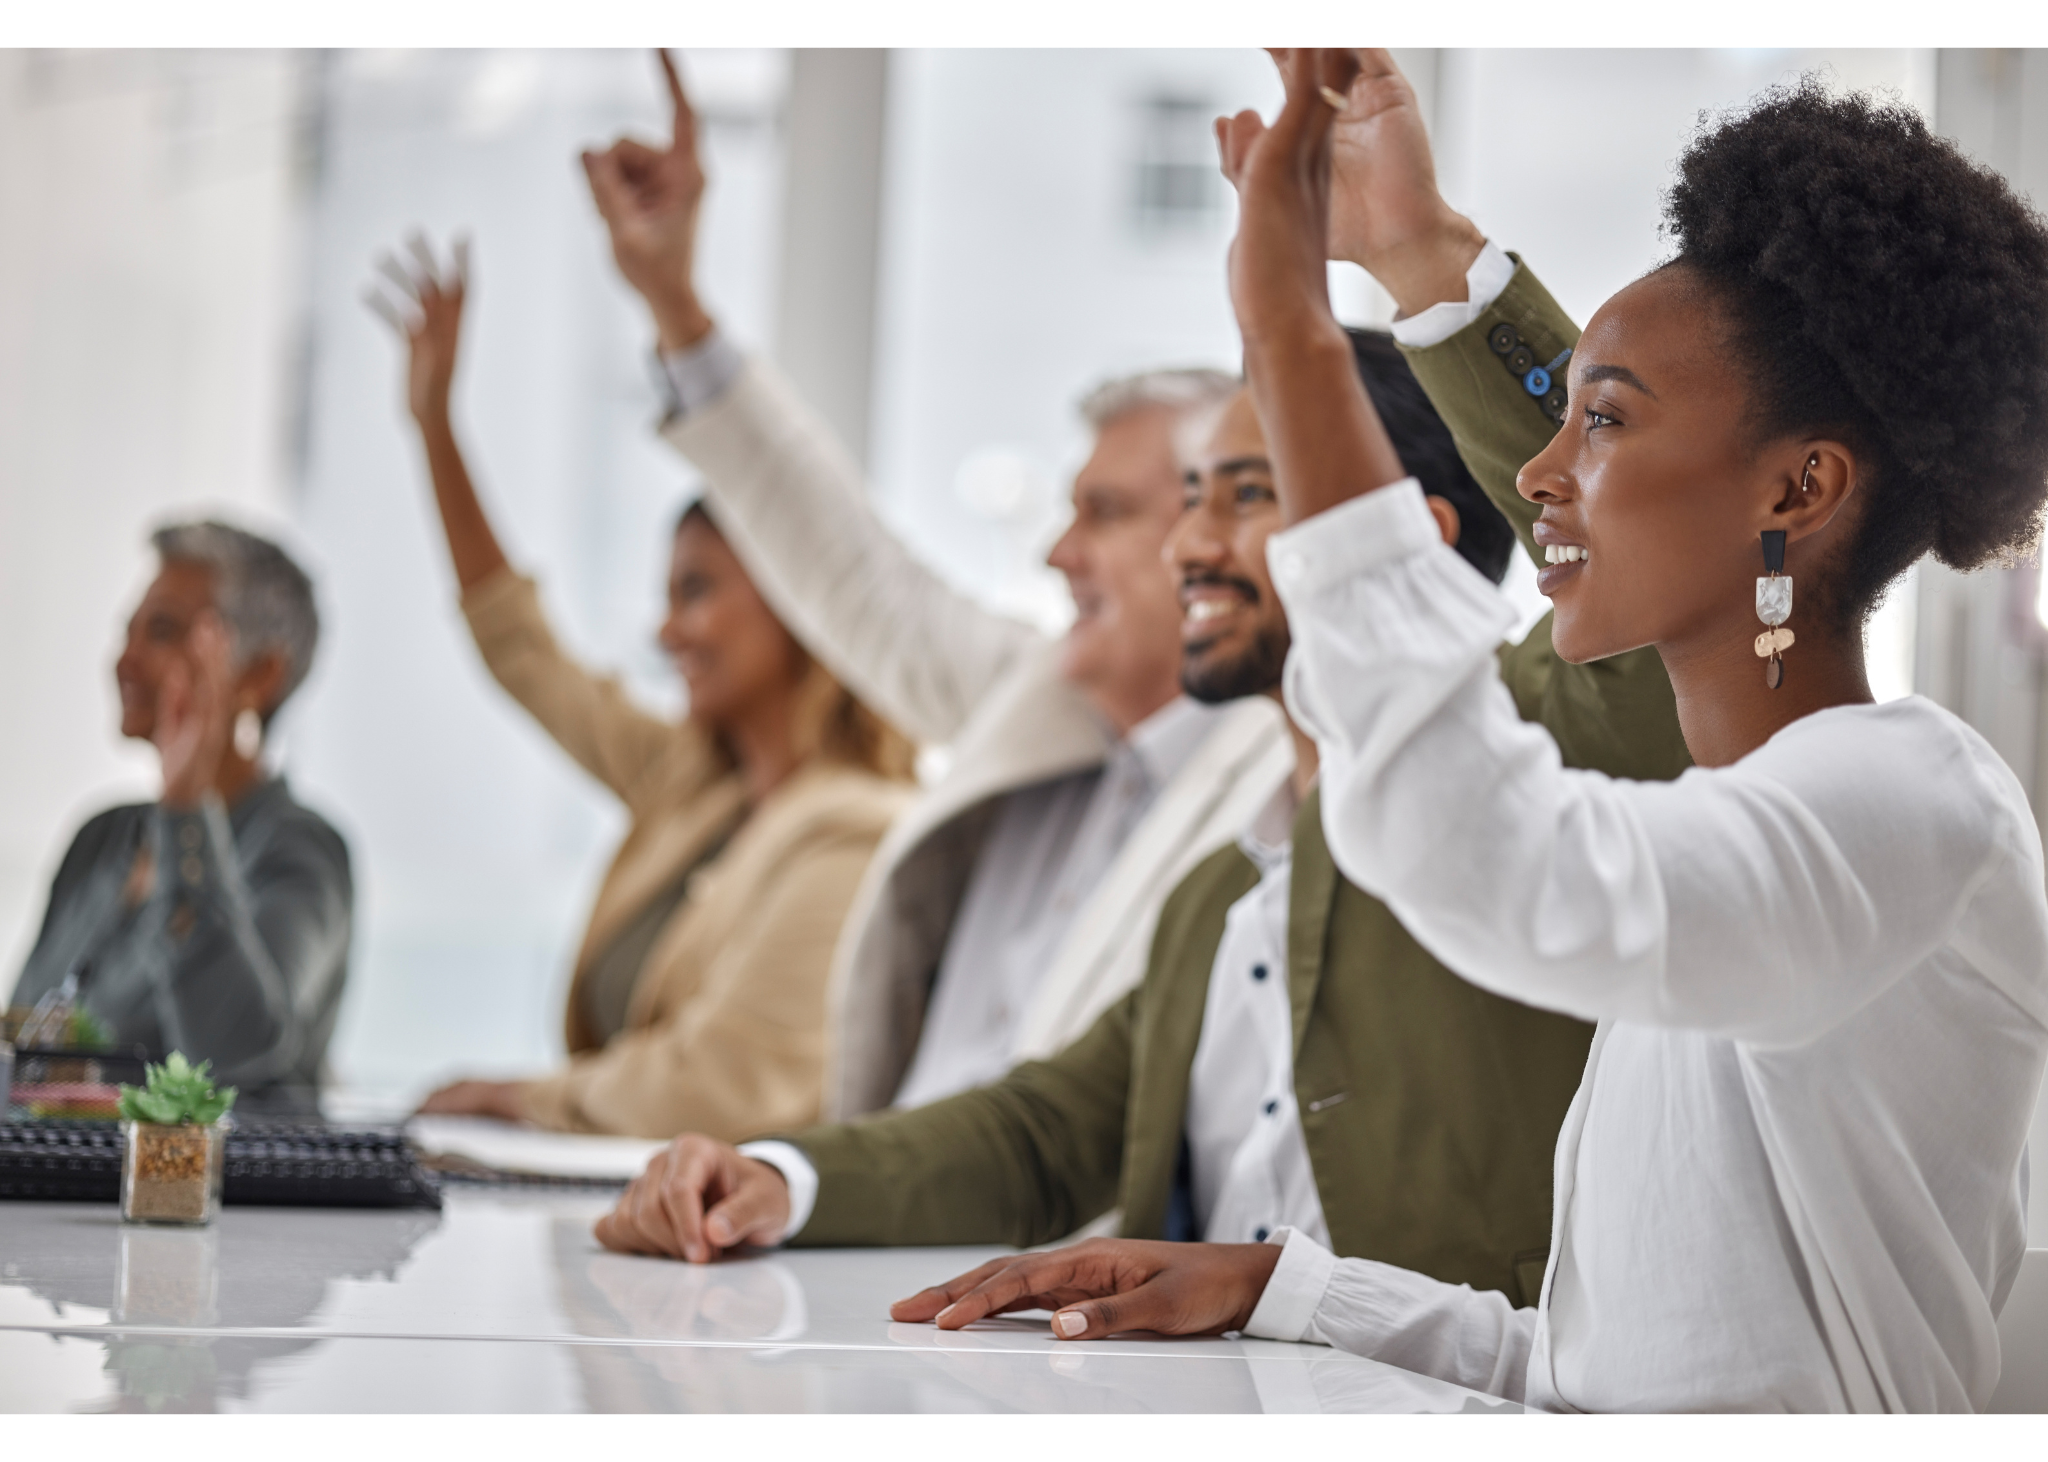 Workplace diversity has increased significantly over the years--embracing diversity and realizing its benefits can help your business compete and succeed.